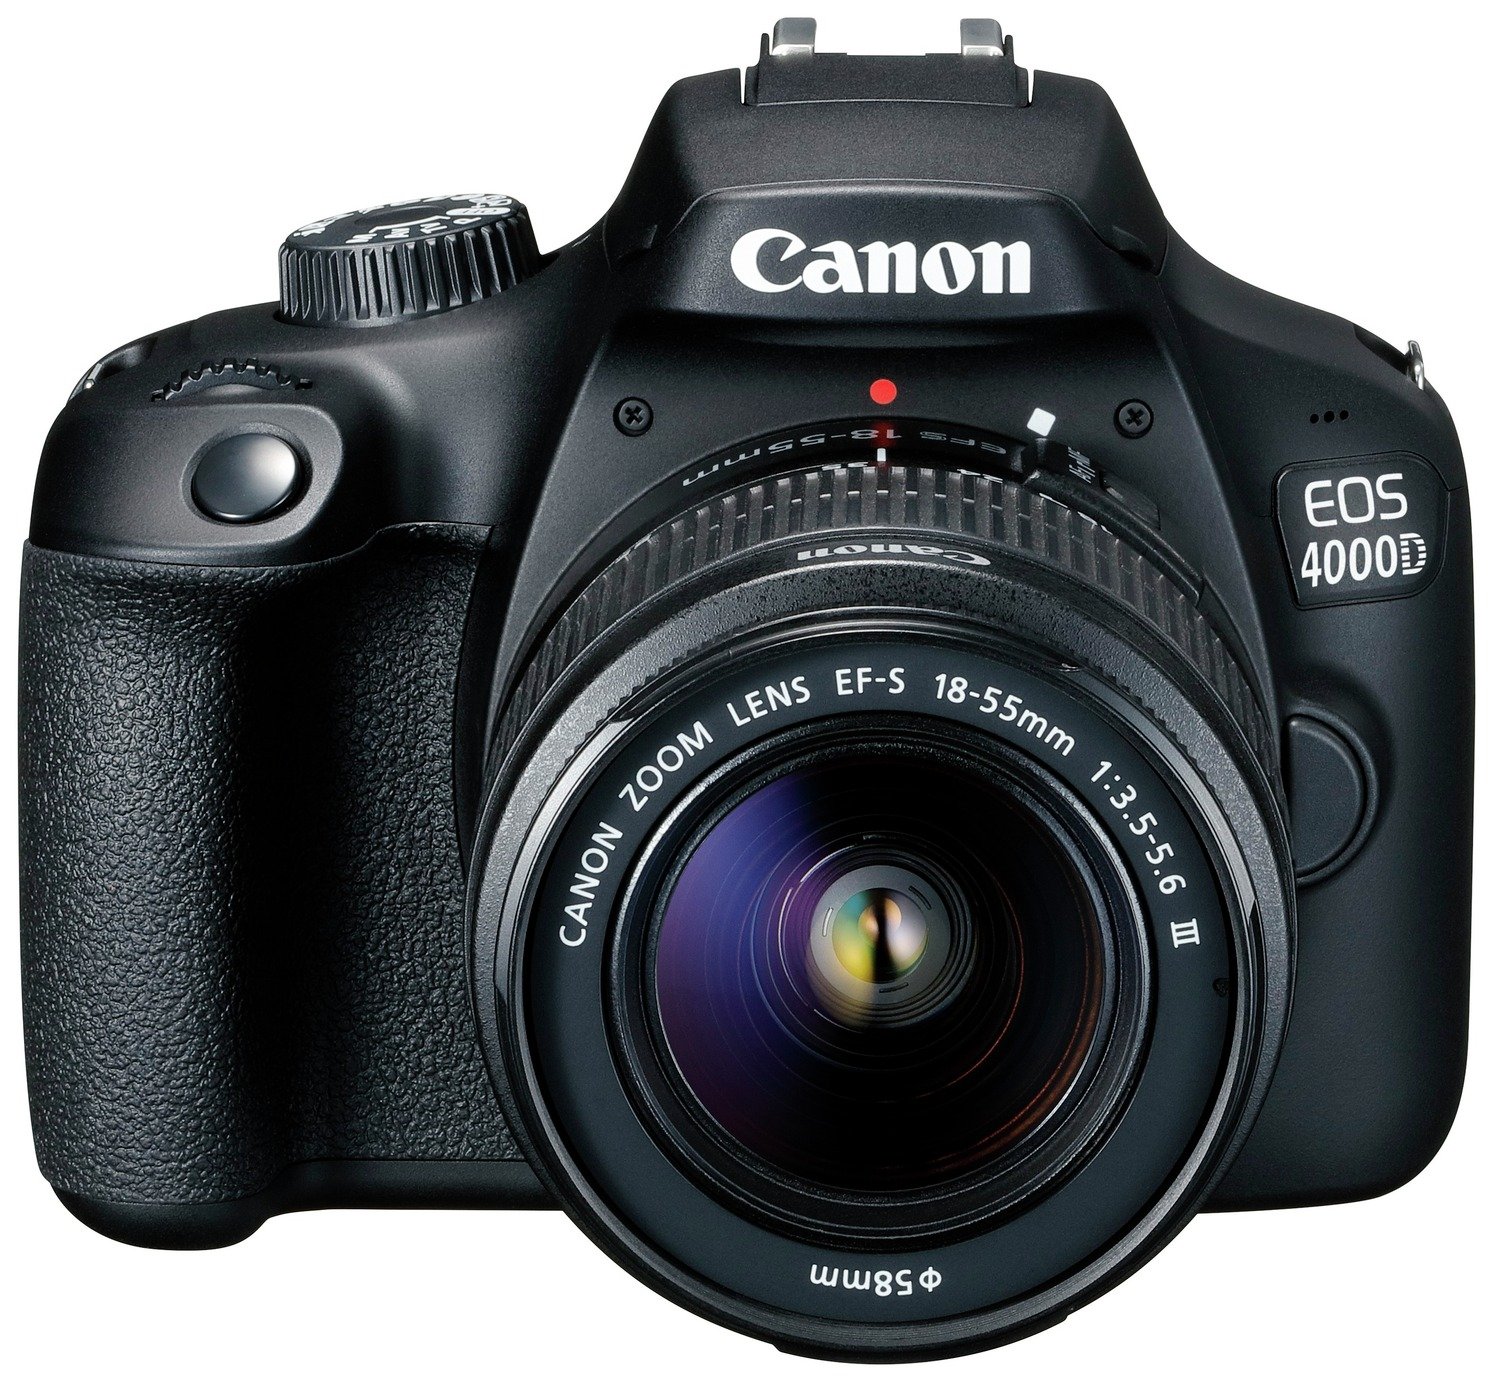 Canon EOS 4000D DSLR Camera Body with 18-55mm Lens